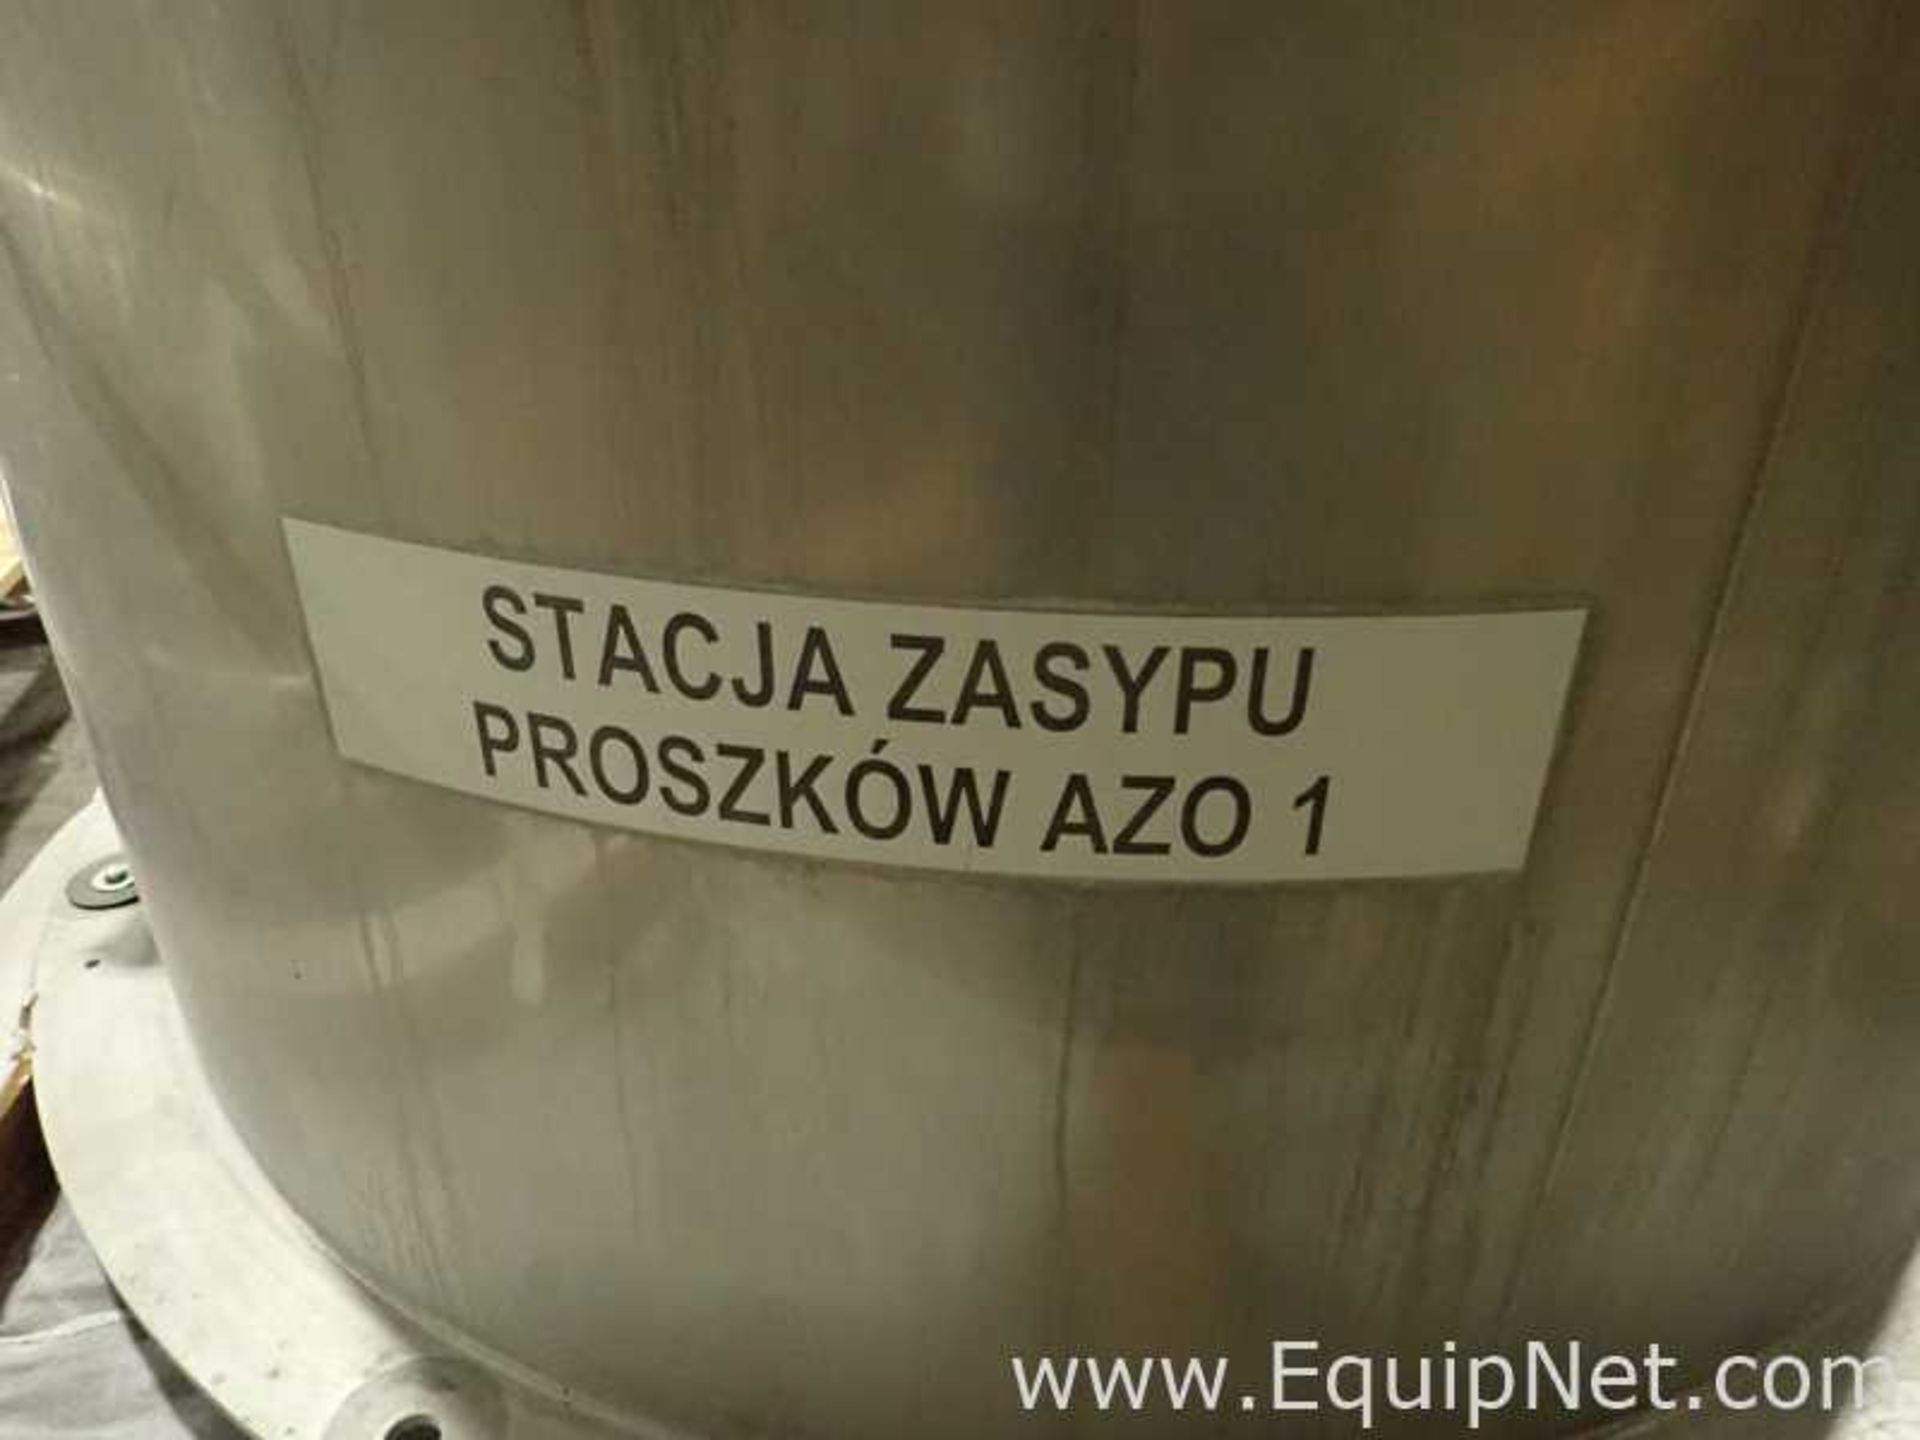 AZO Raw Material Production Equipment - Image 19 of 21